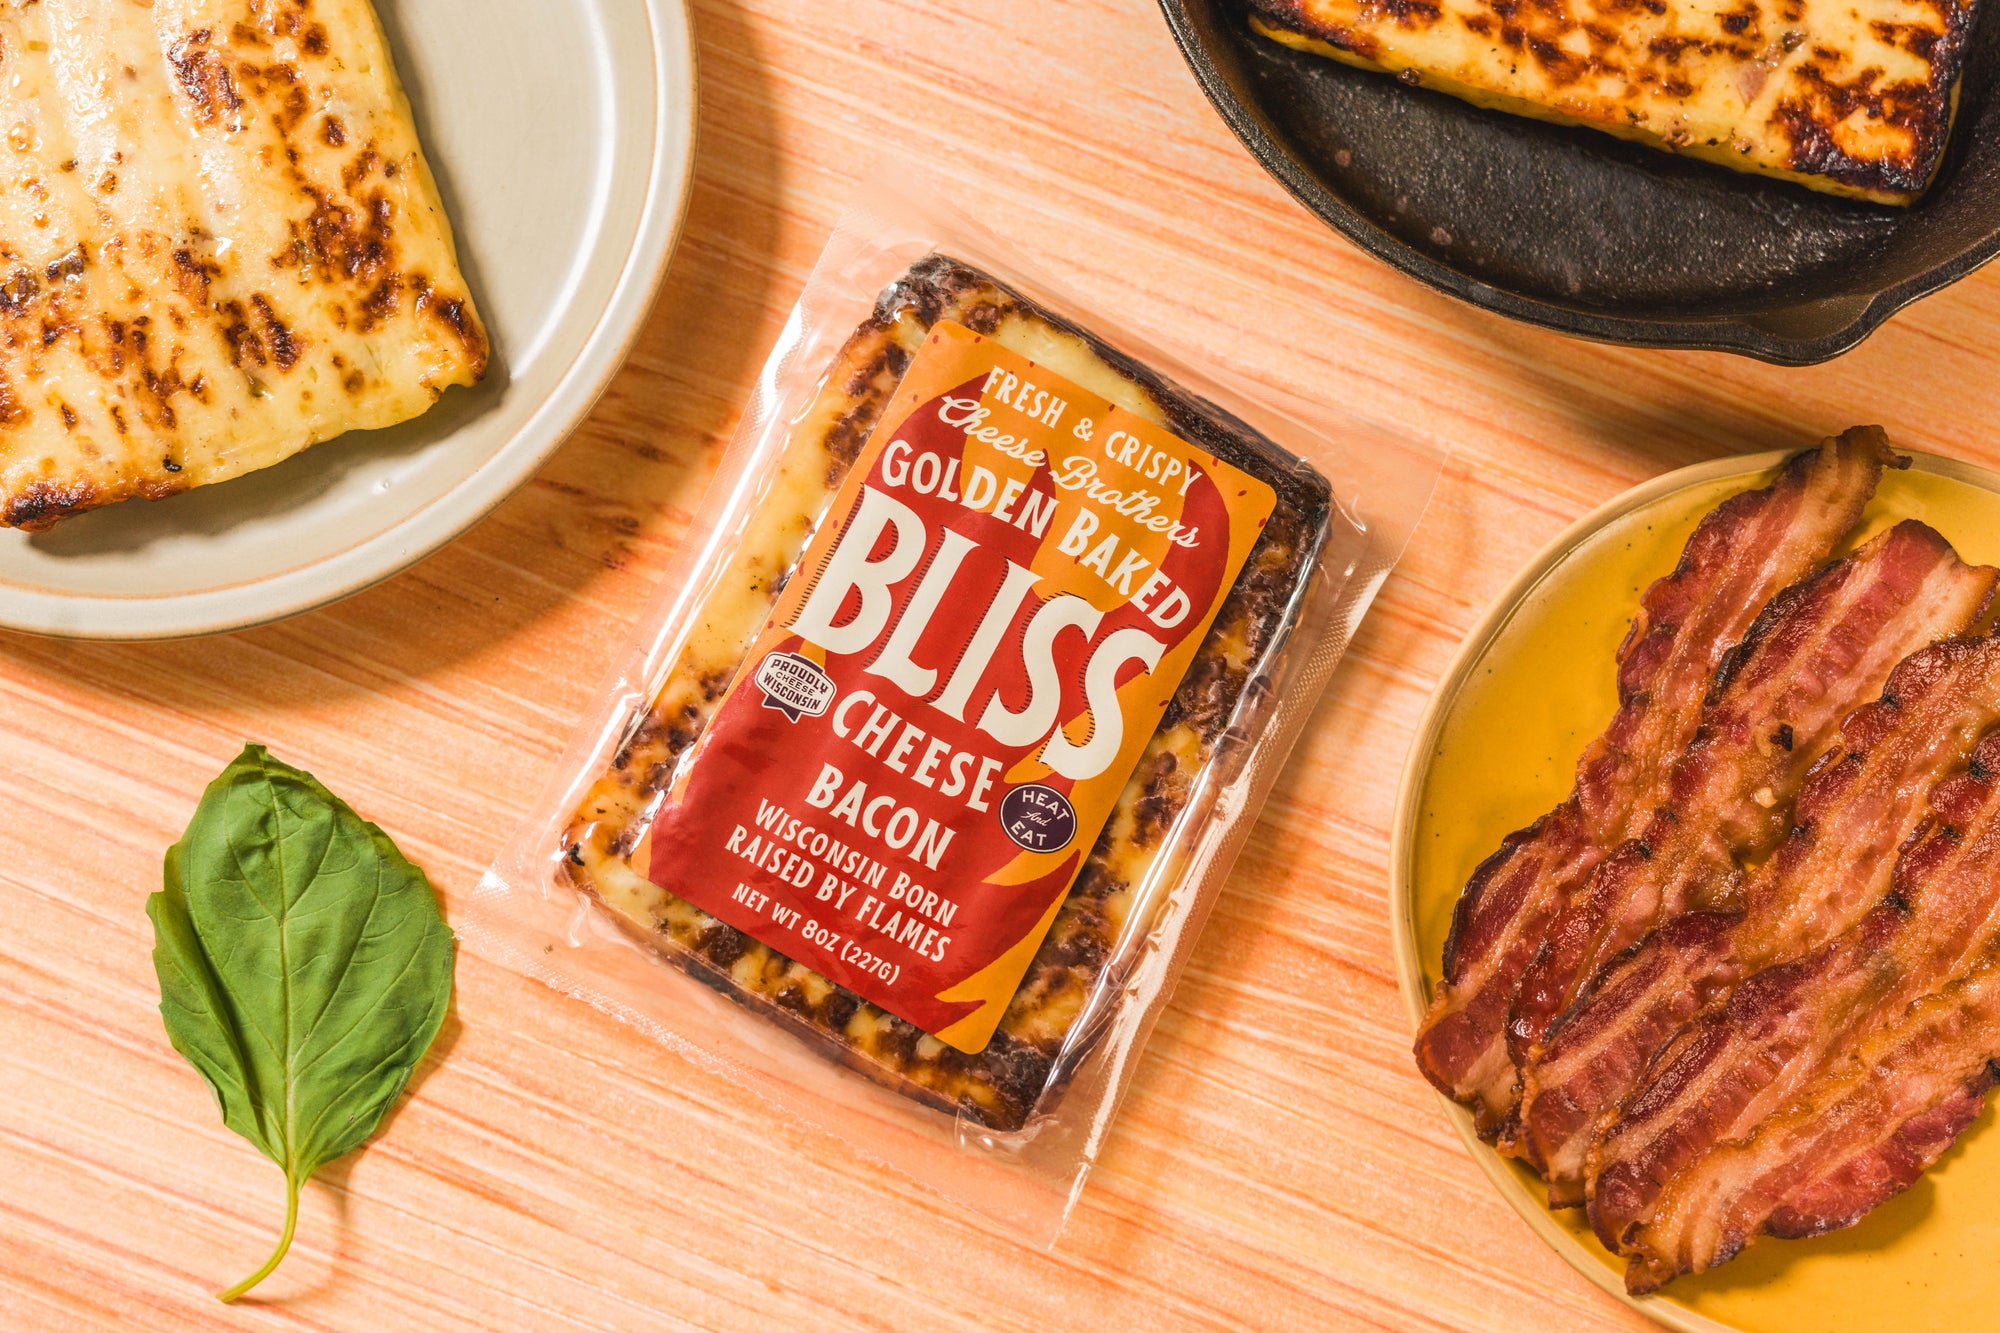 Bacon Golden Baked Bliss Cheese *New Release*